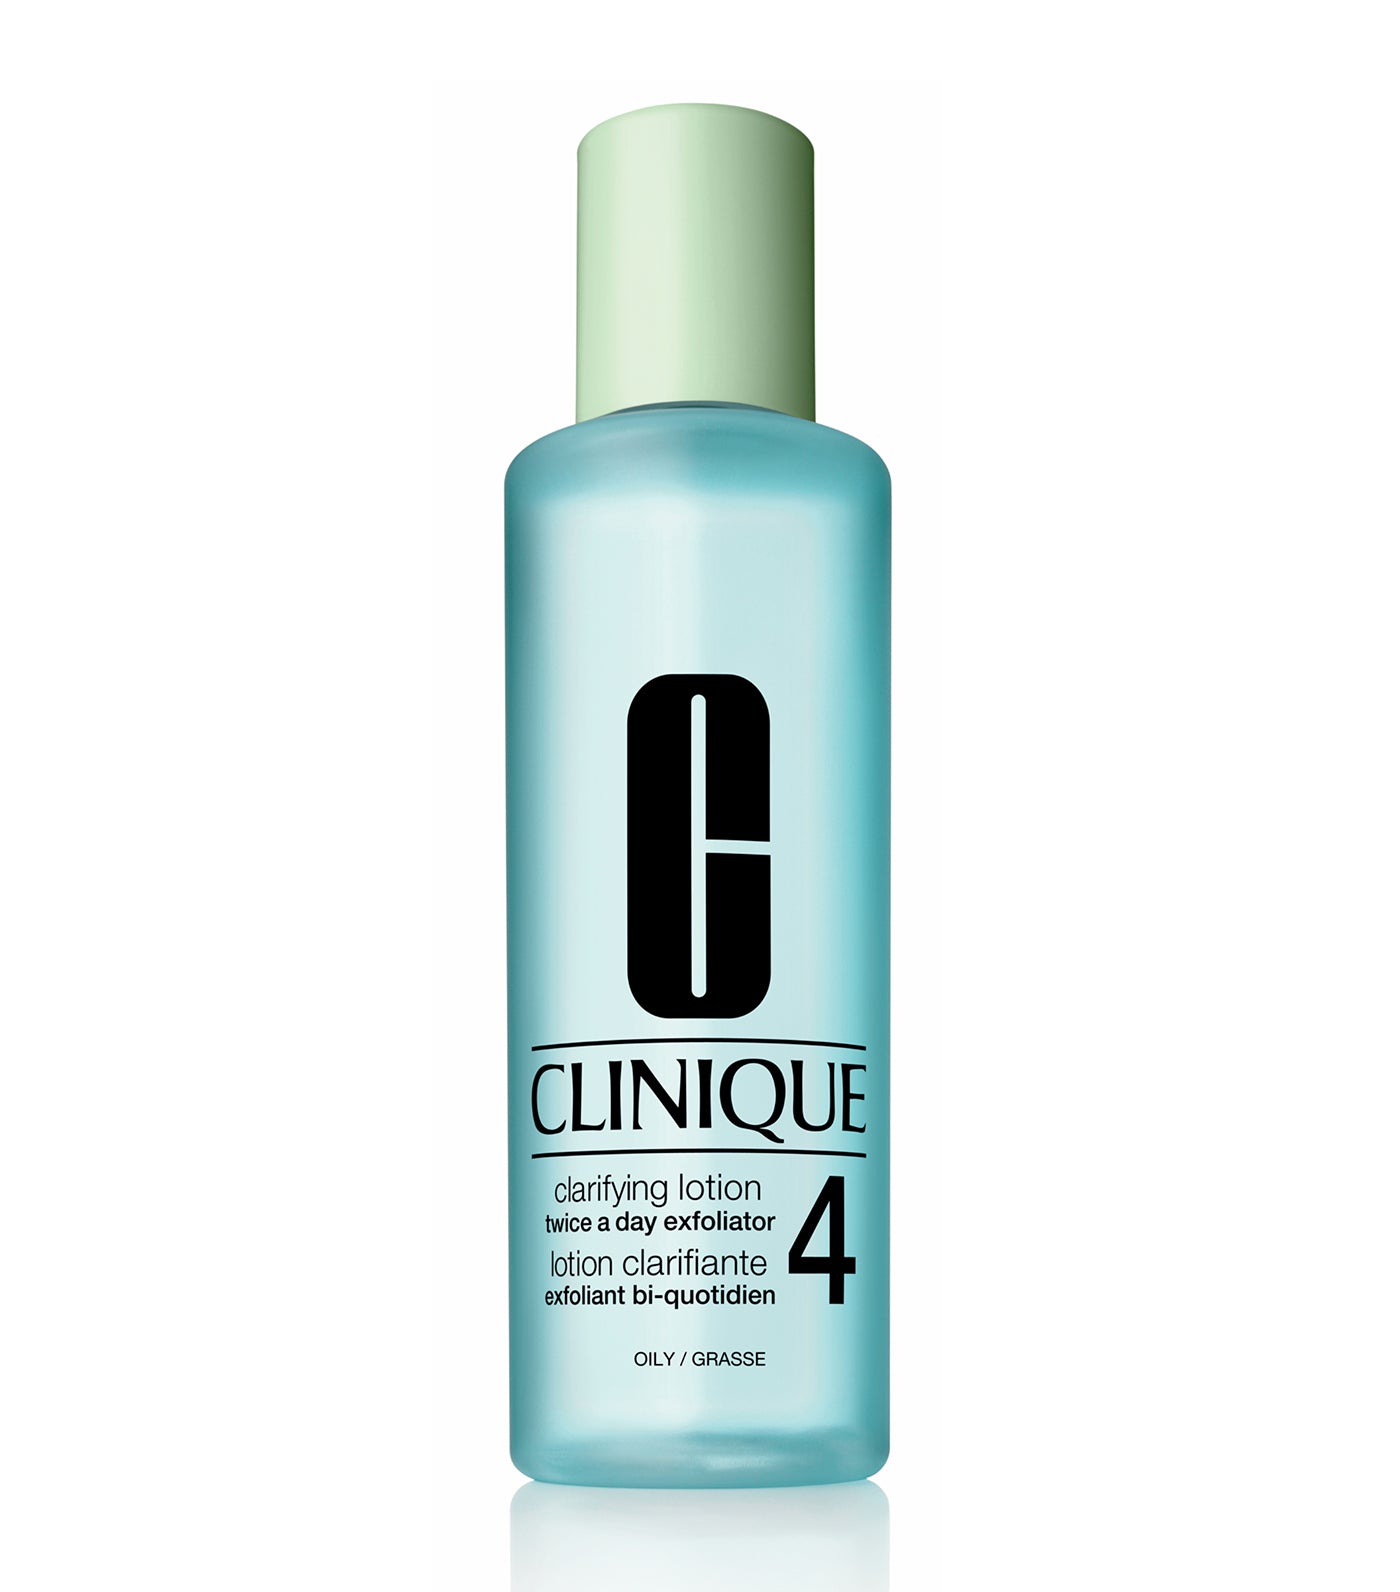 clinique skin type 4 clarifying lotion 1.0 twice a day exfoliator